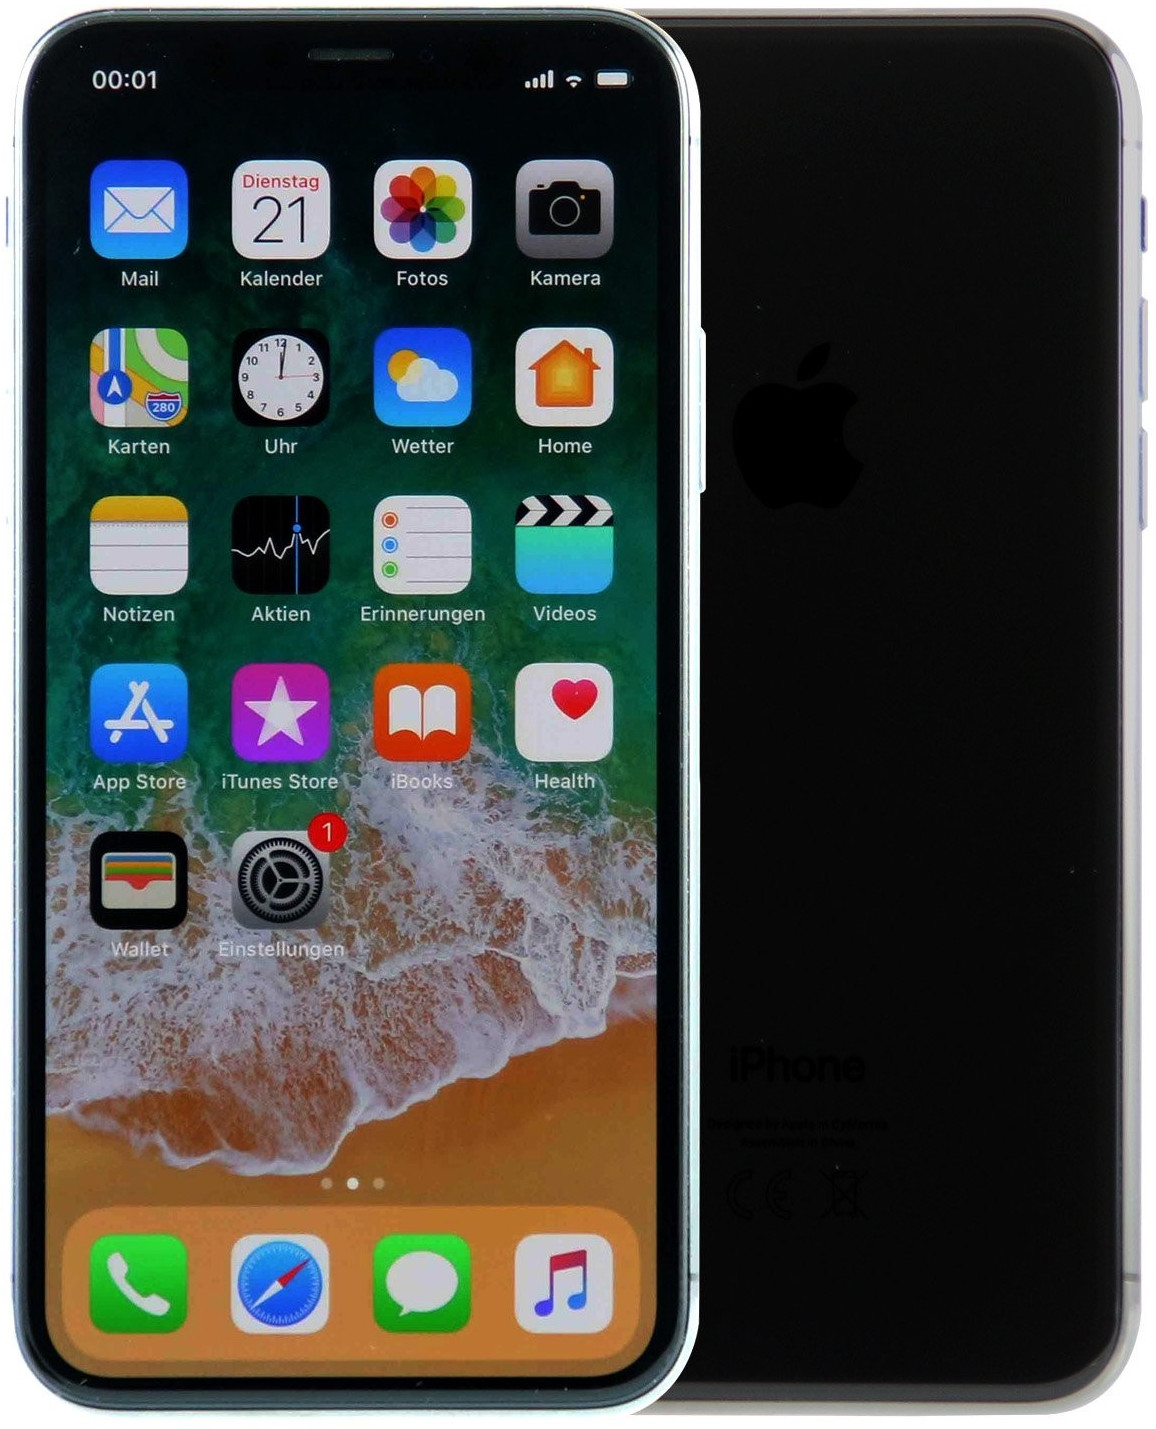 iPhone X 256GB Space Gray - New battery - Refurbished product